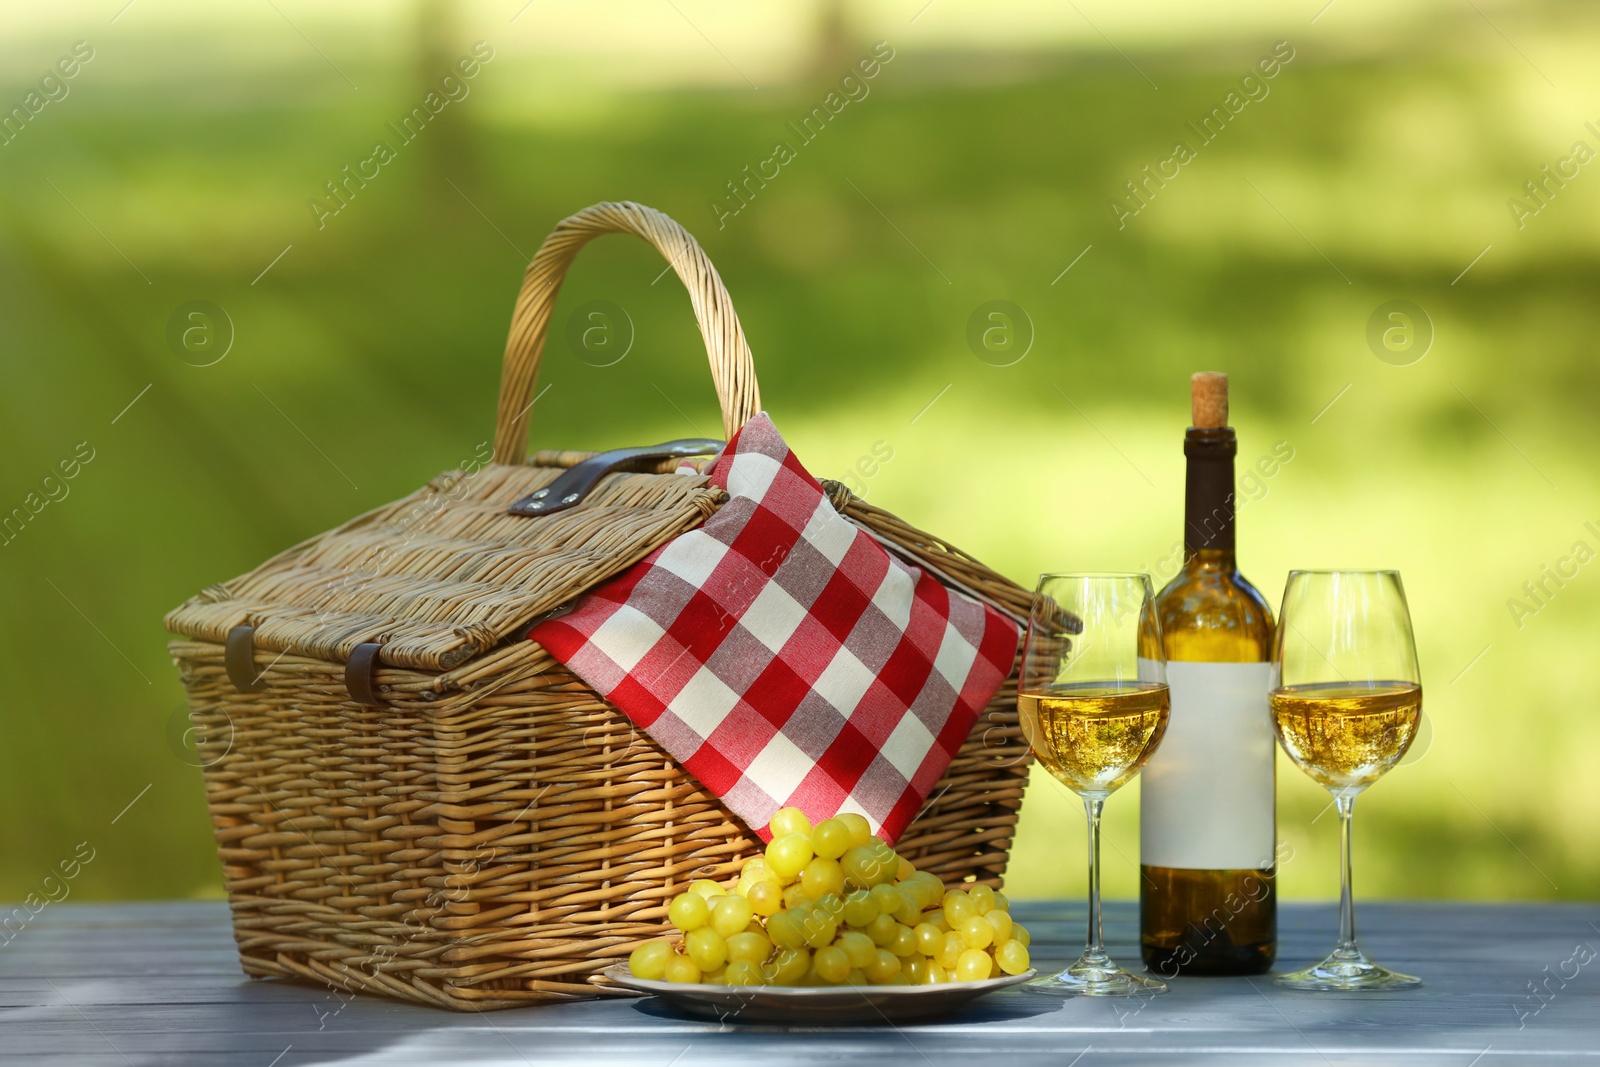 Photo of Wicker basket with blanket, wine and grapes on table in park. Summer picnic